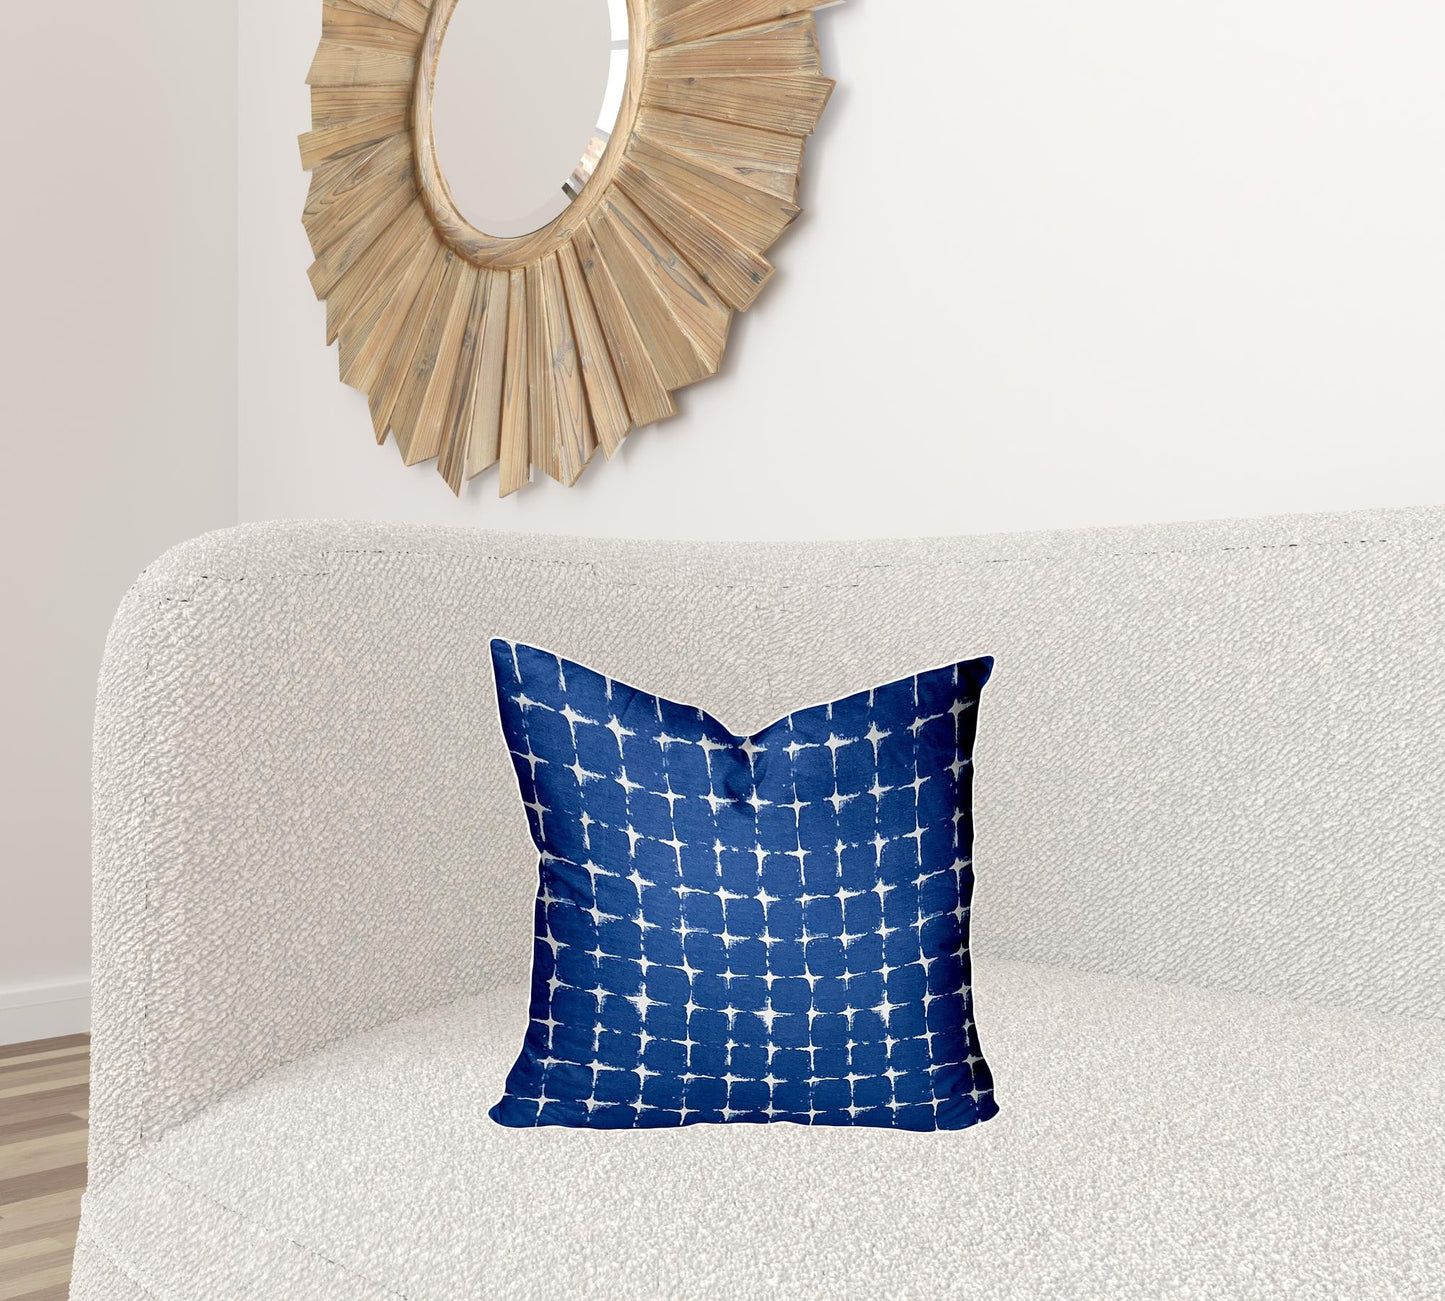 18" X 18" Blue And White Enveloped Gingham Throw Indoor Outdoor Pillow